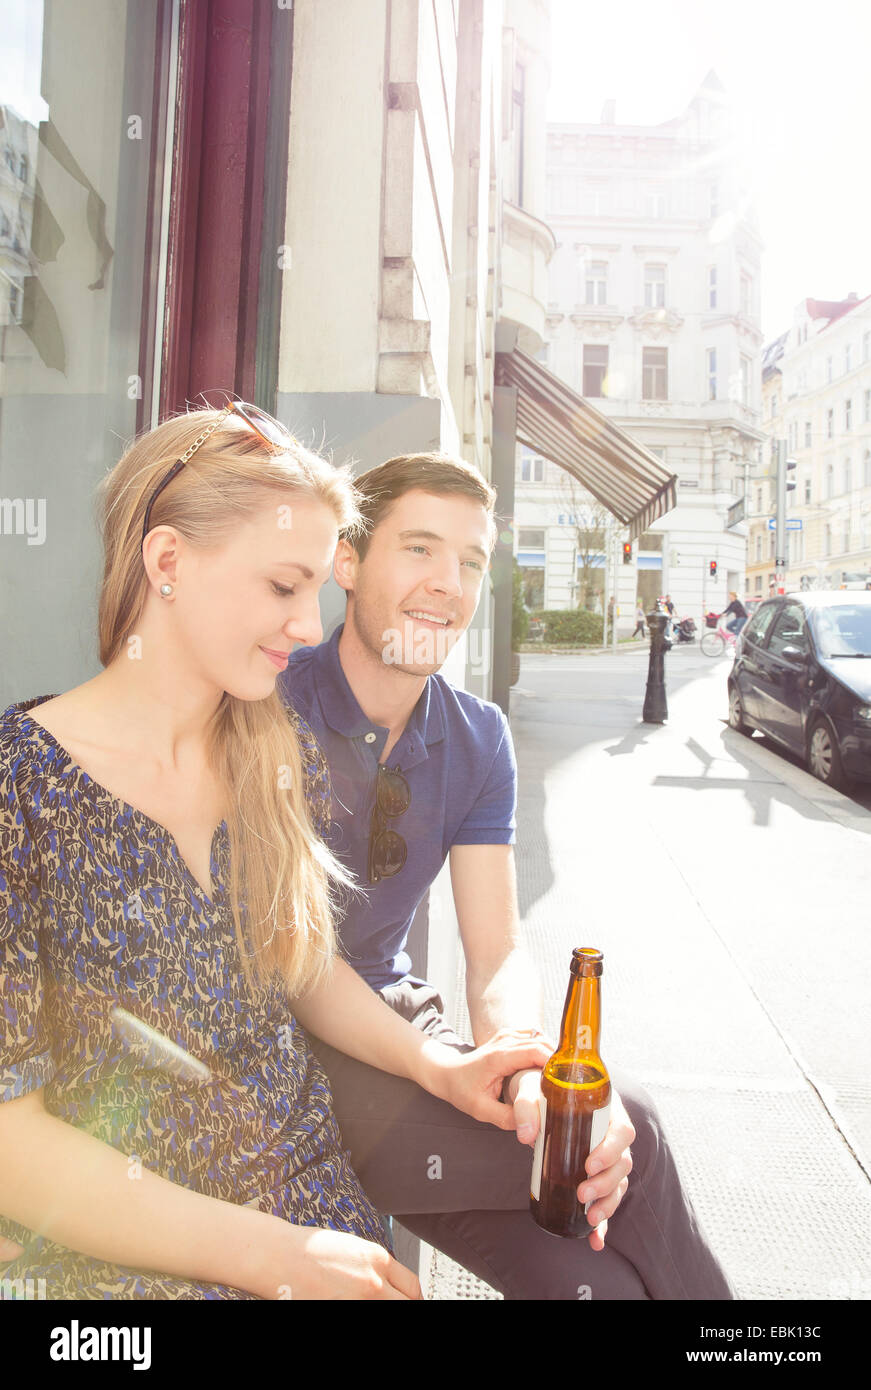 Young couple at sidewalk cafe drinking beer Stock Photo